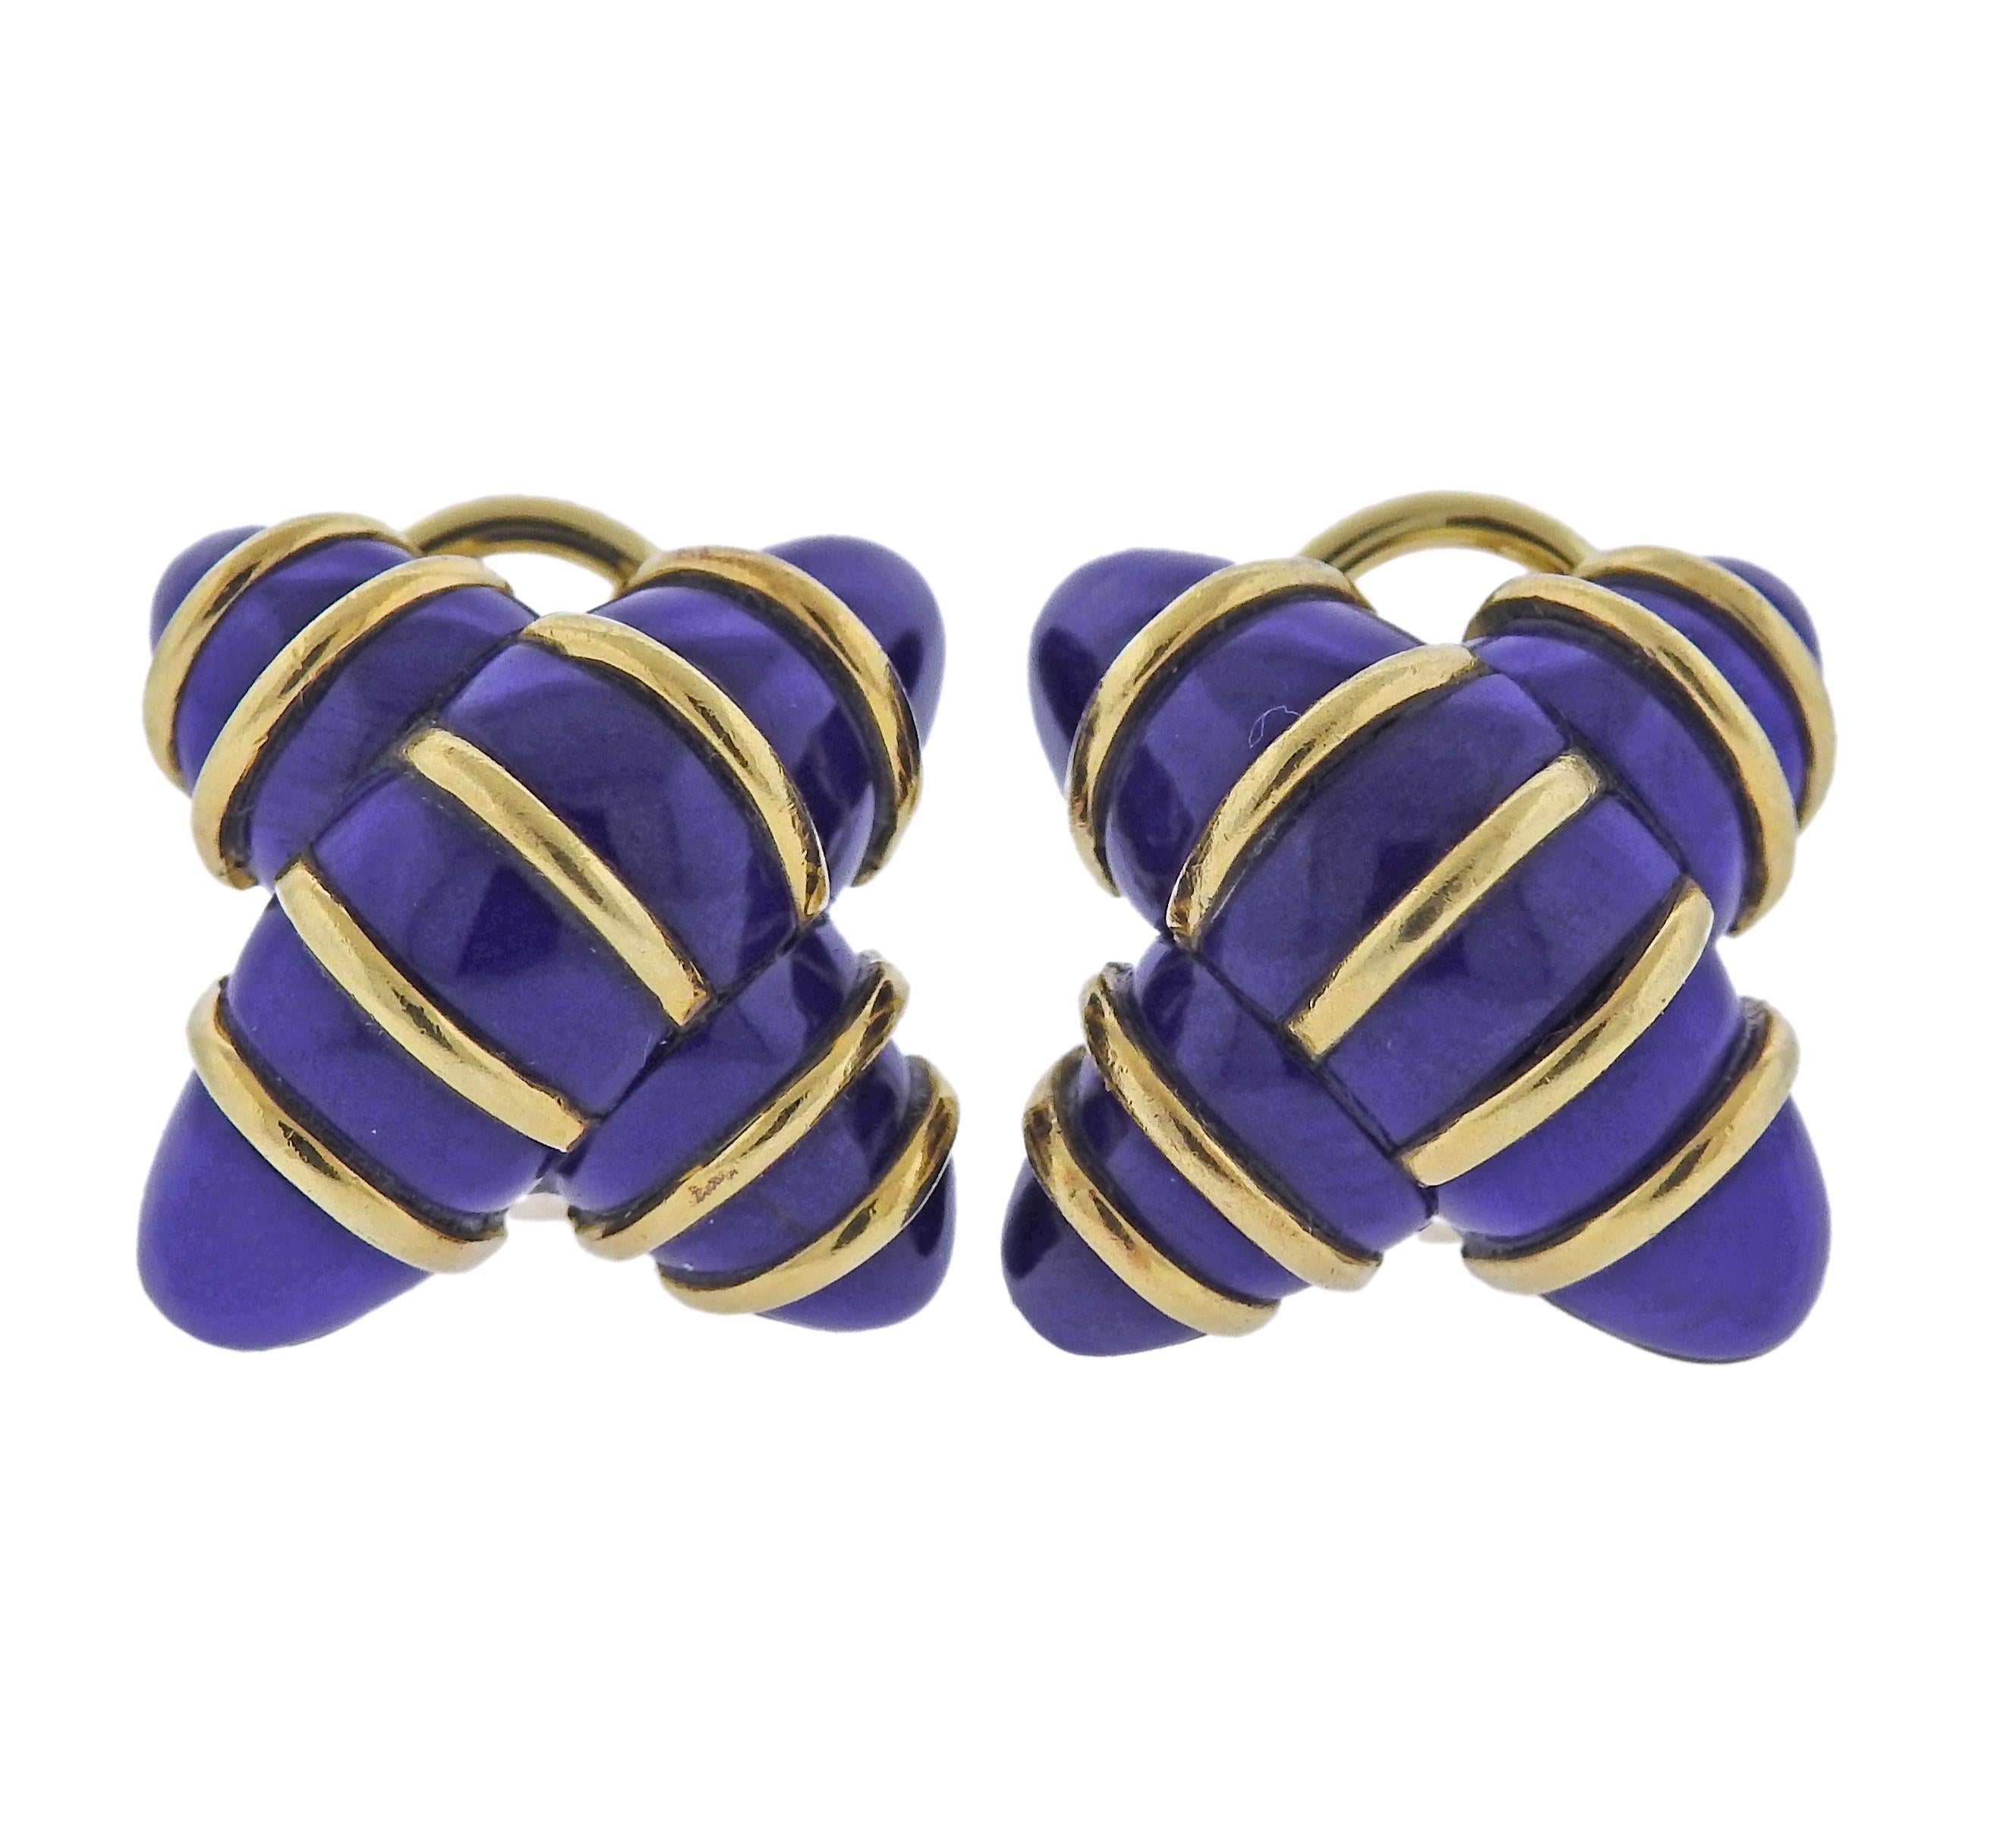 Angela Cummings Gold Blue Enamel X Earrings In Excellent Condition For Sale In New York, NY